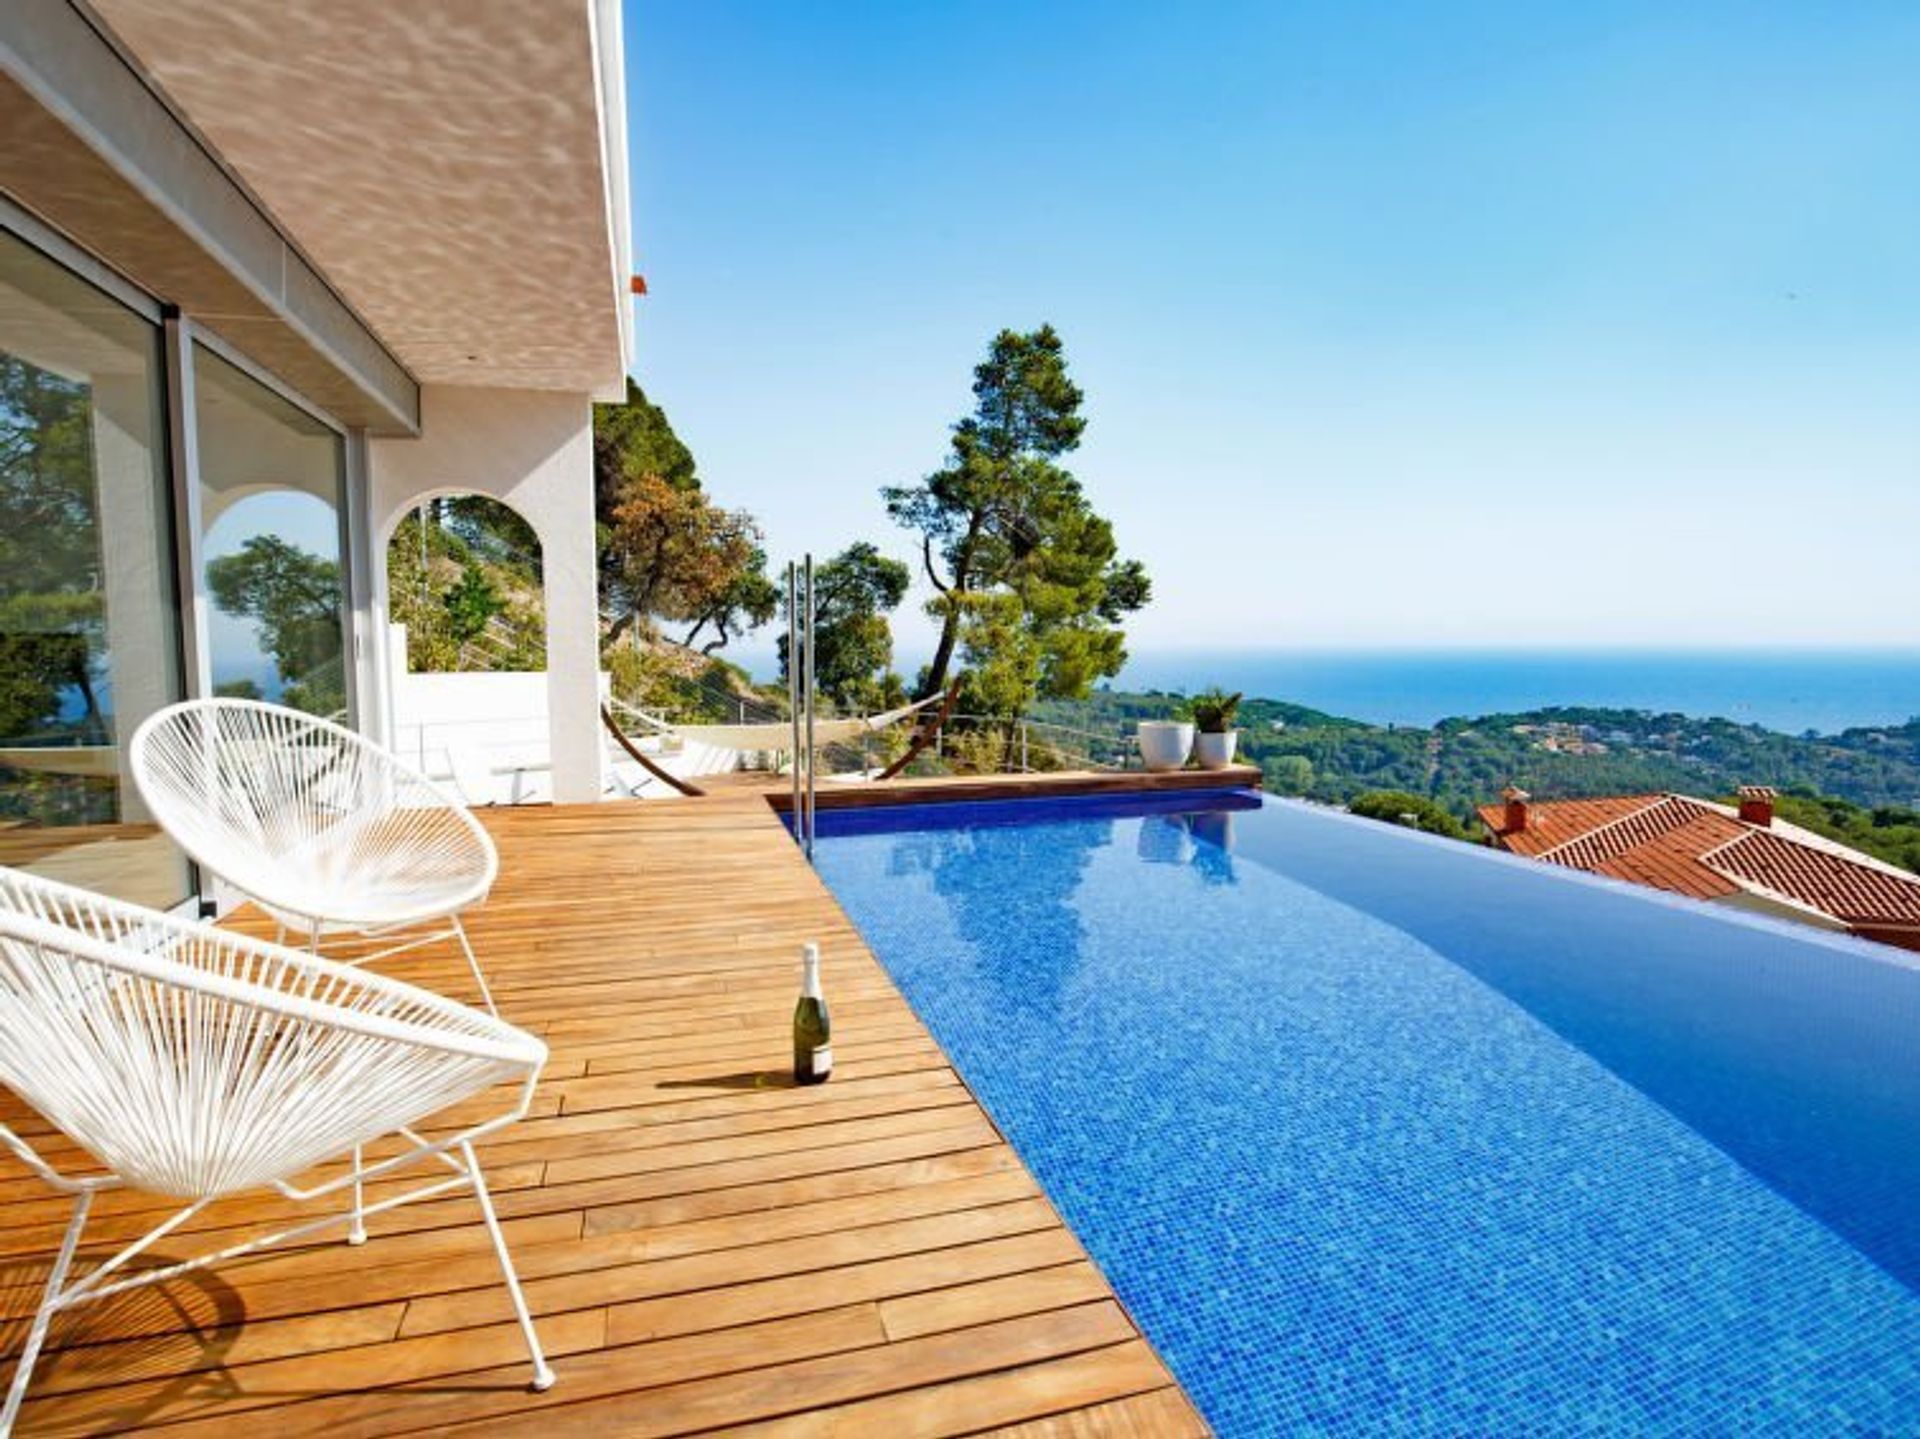 Enjoy stunning views of the Costa Brava landscape from your own infinity pool